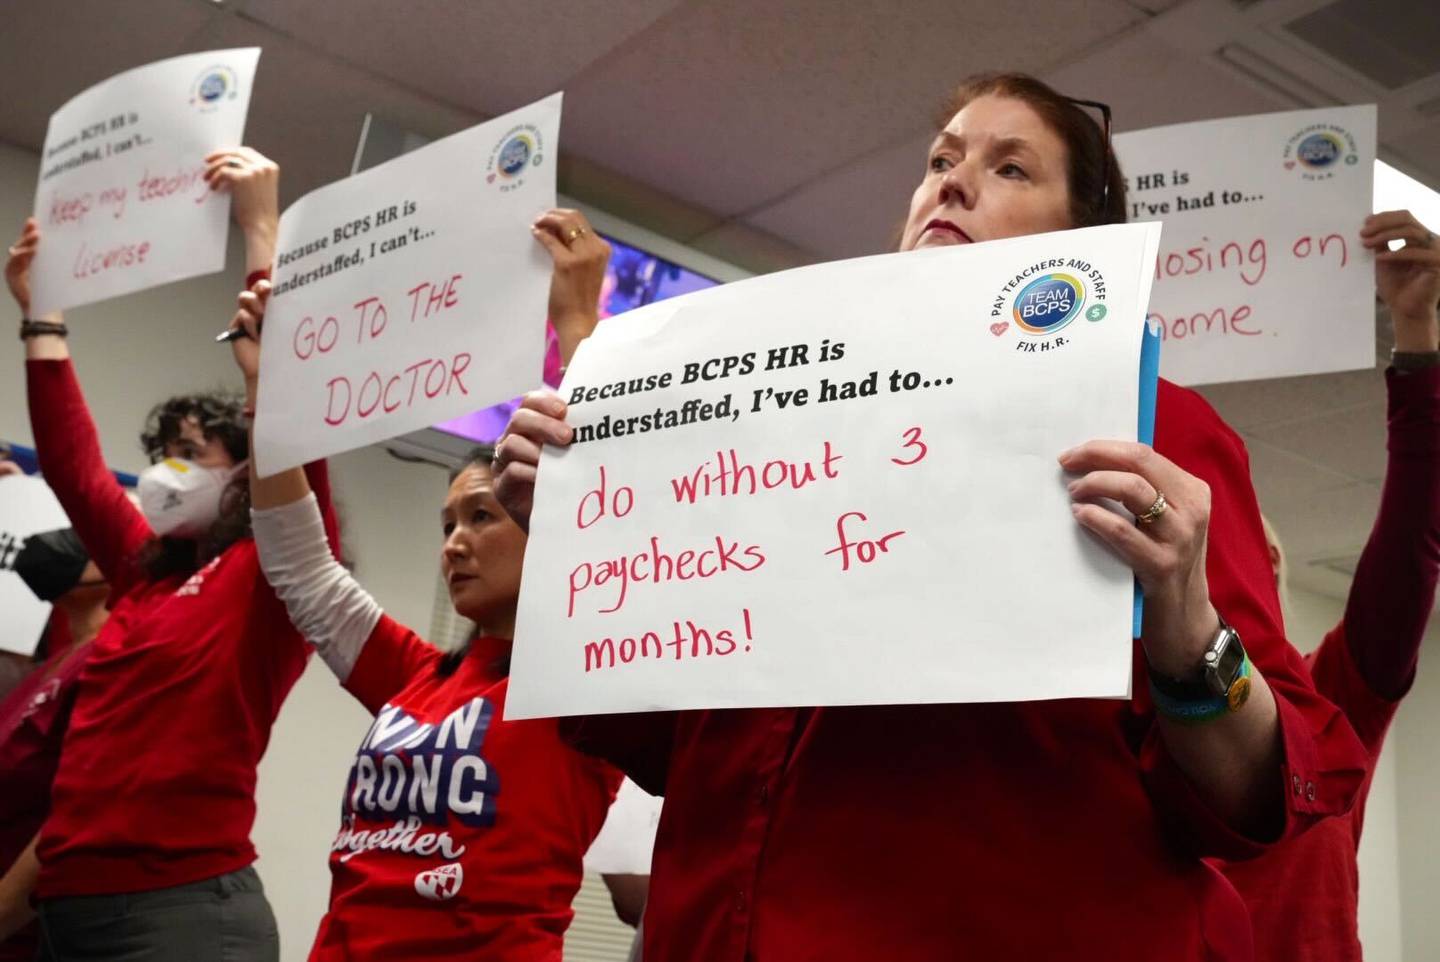 Kathleen Cave, right, and other Baltimore County Public School teachers stand together with signs calling out BCPS for pay being withheld, mistakes with benefits, delays in tuition reimbursement and stalled certification, during a school board meeting Tuesday, December 6.